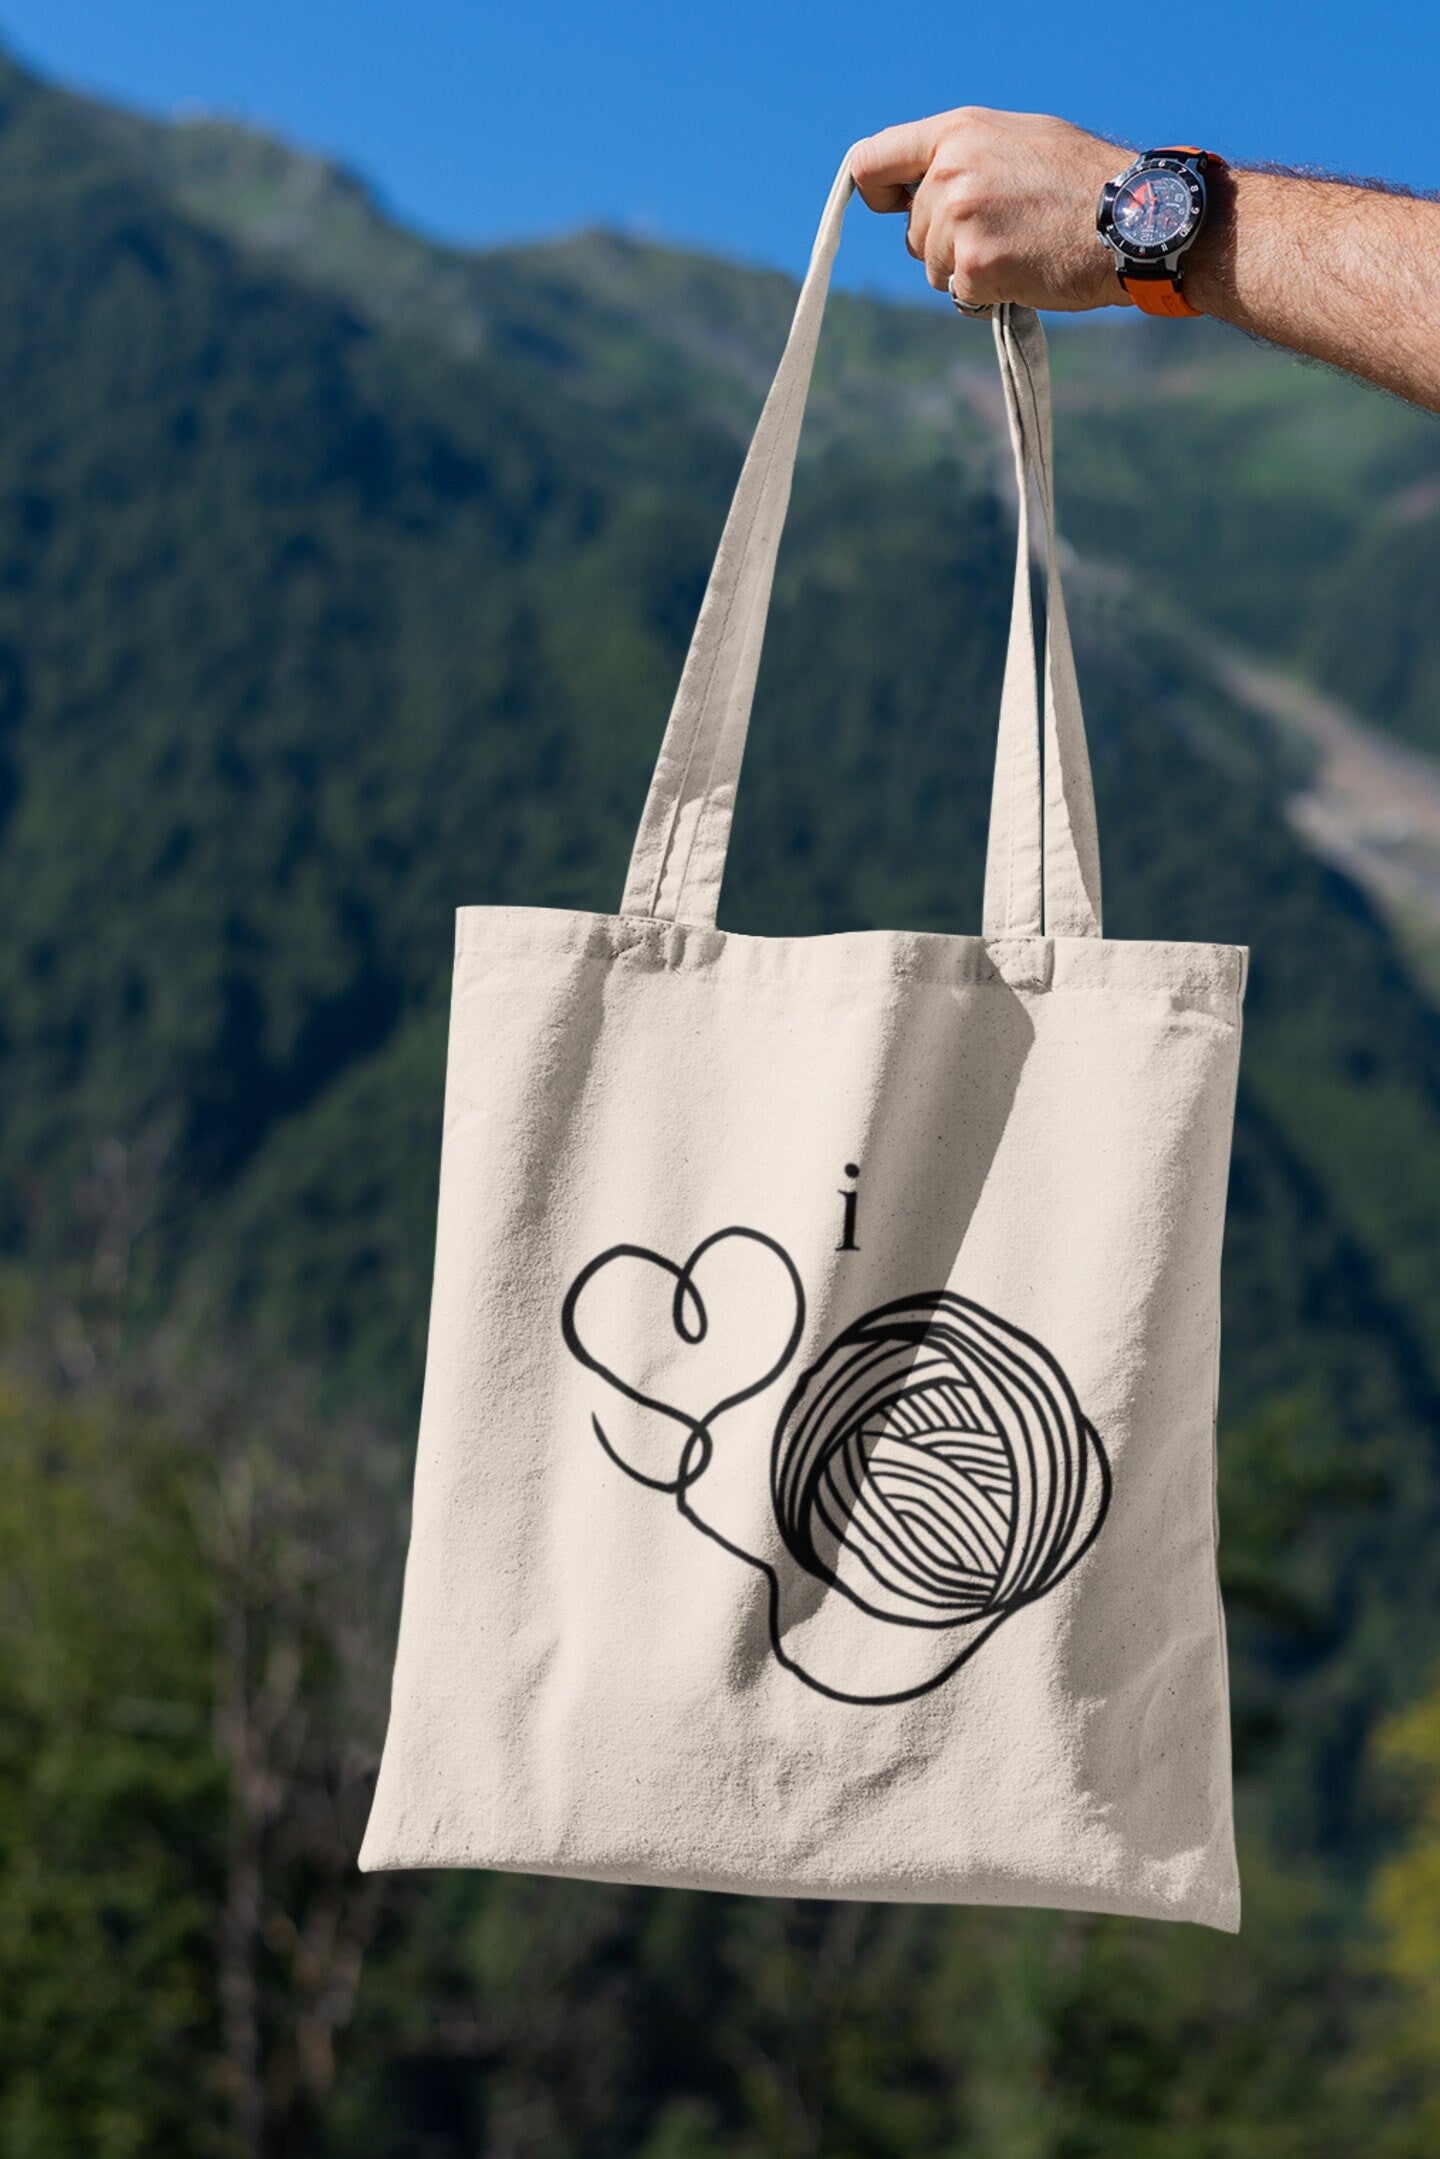 Craft Project Bag • "I Heart Yarn" Tote • Cotton Canvas Yarn Bag • Gift For Knitter or Crocheter